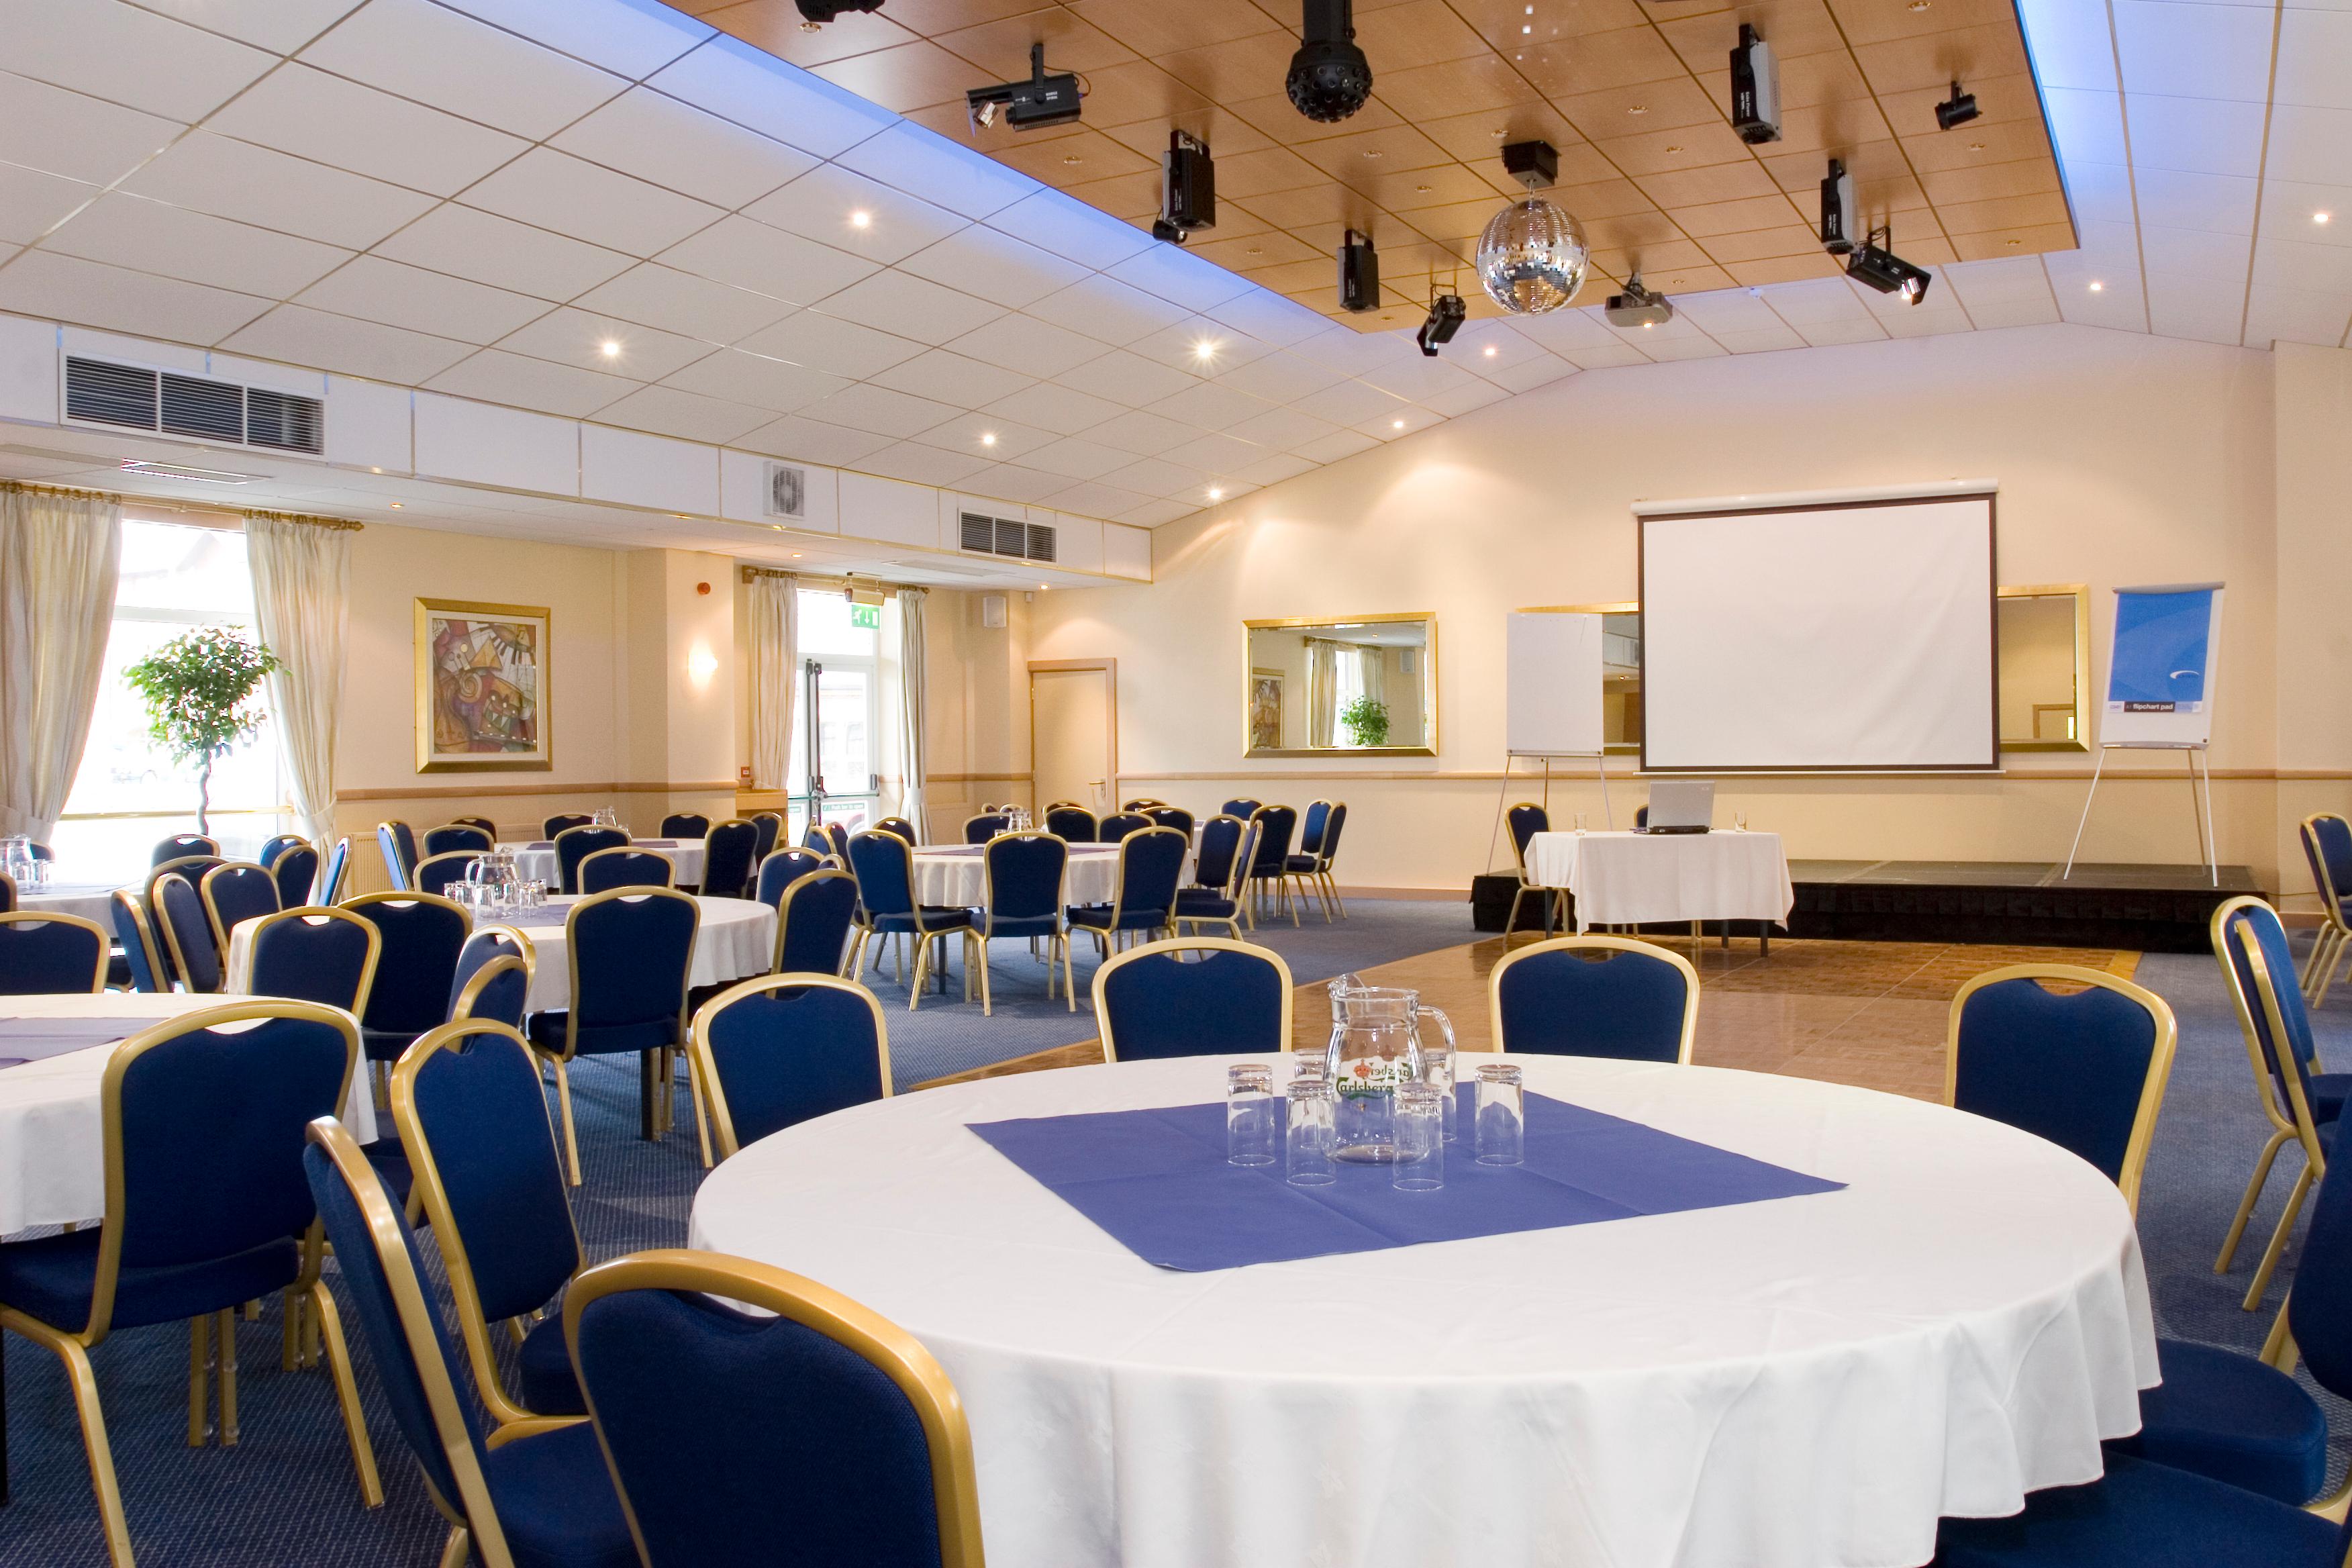 The Fairway And Bluebell Banqueting Suite, Bluebell Banqueting Suite photo #6